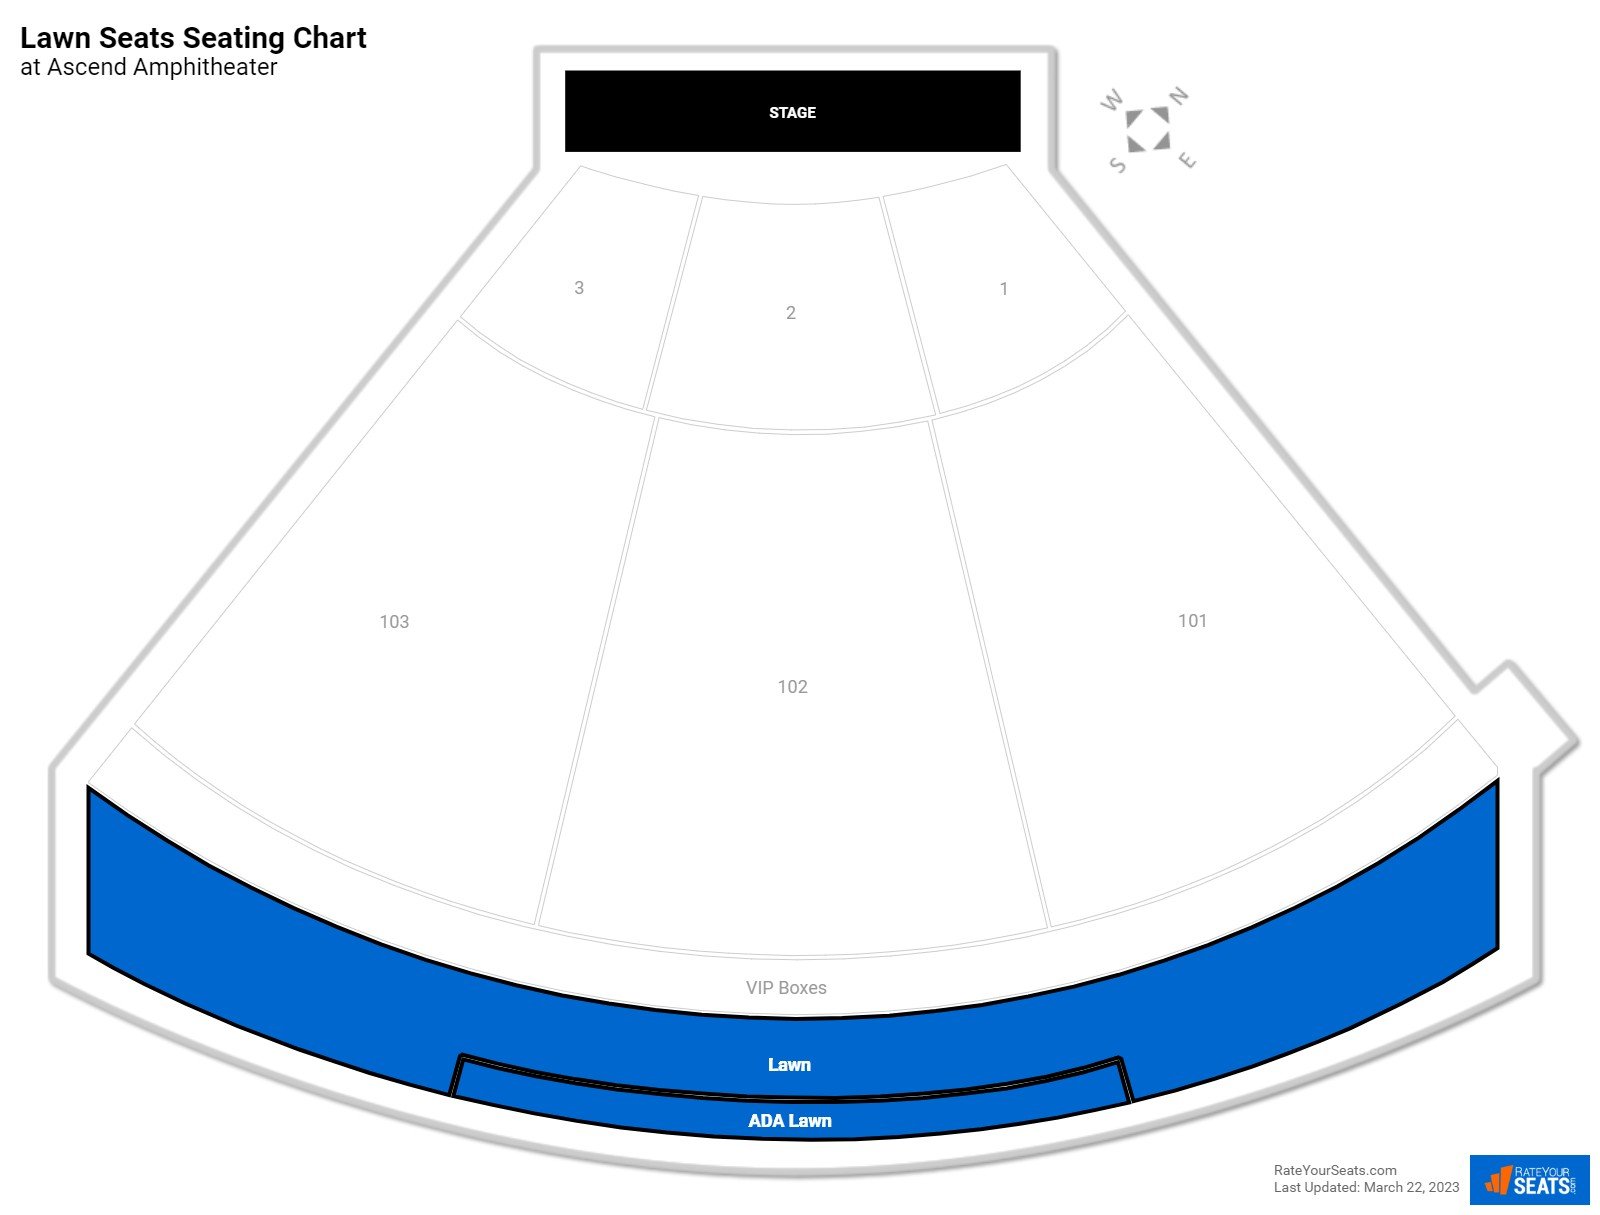 Concert Lawn Seats Seating Chart at Ascend Amphitheater